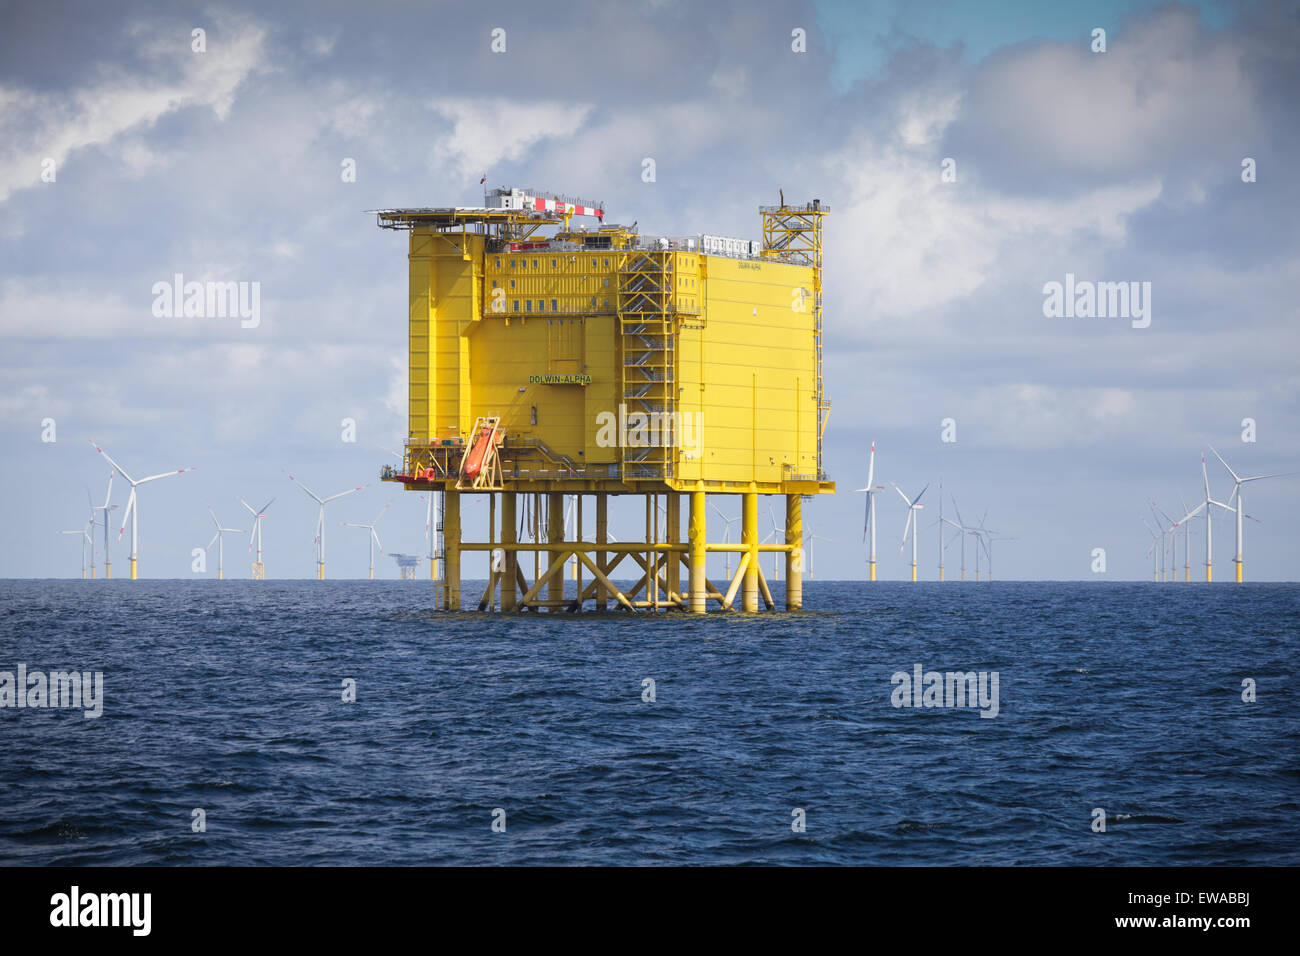 The DolWin Alpha HVAC to HVDC converter platform, located next to the Borkum Riffgrund Offshore Wind Farm in the German Bight. Stock Photo